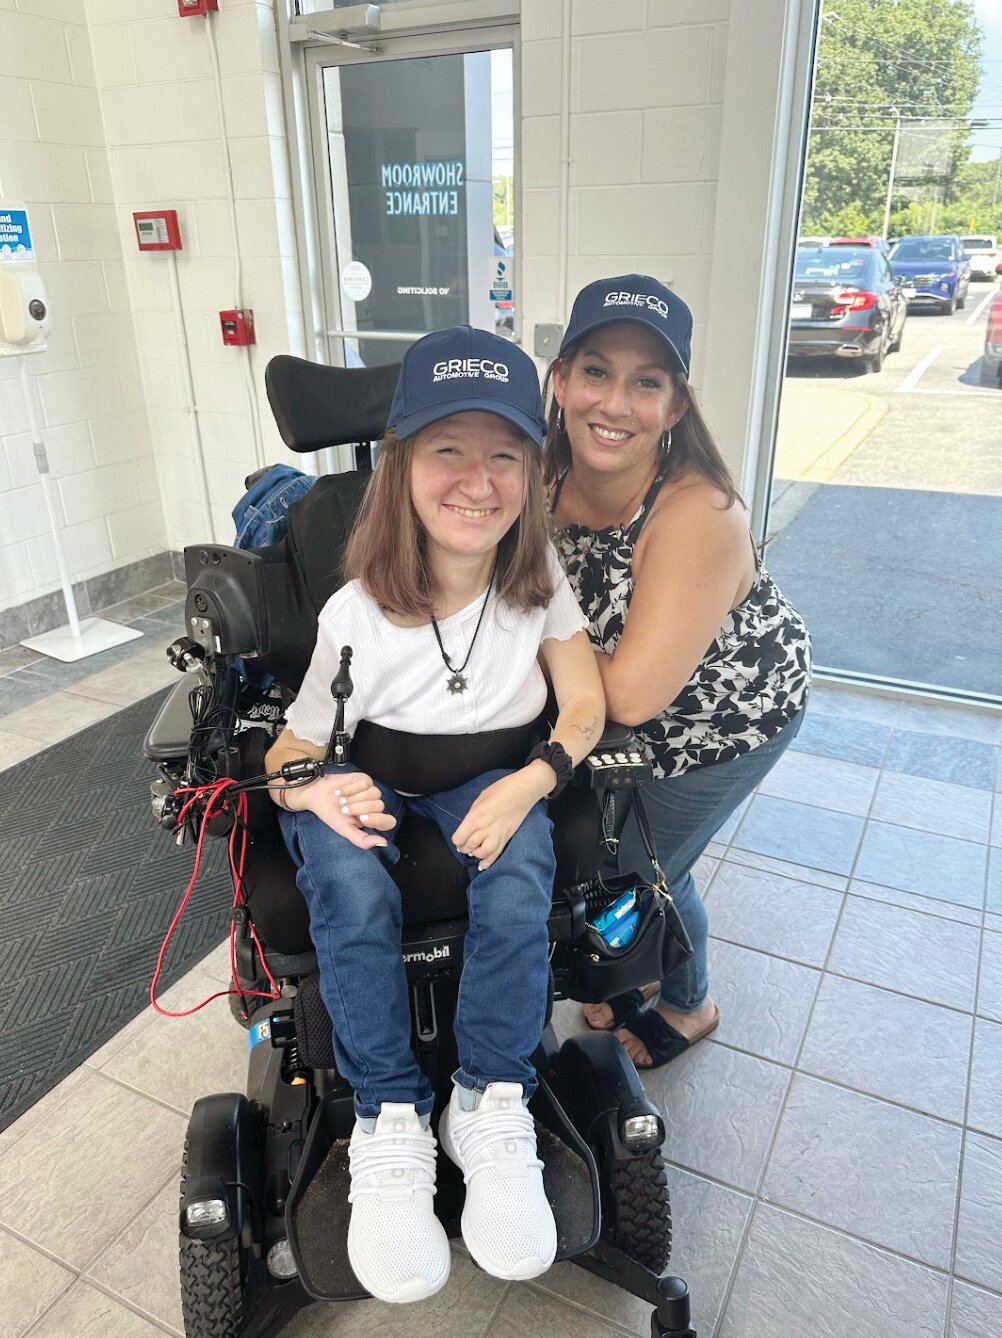 GRATEFUL GUESTS: Ciarra Muller waited inside Grieco Honda’s two-story showroom, with her mother, Lacie Messier. Muller was set to start as a freshman at Community College of Rhode Island, earlier this week. Grieco Auto Group presented her family with a Honda Odyssey EX, fully equipped to accommodate a wheelchair.